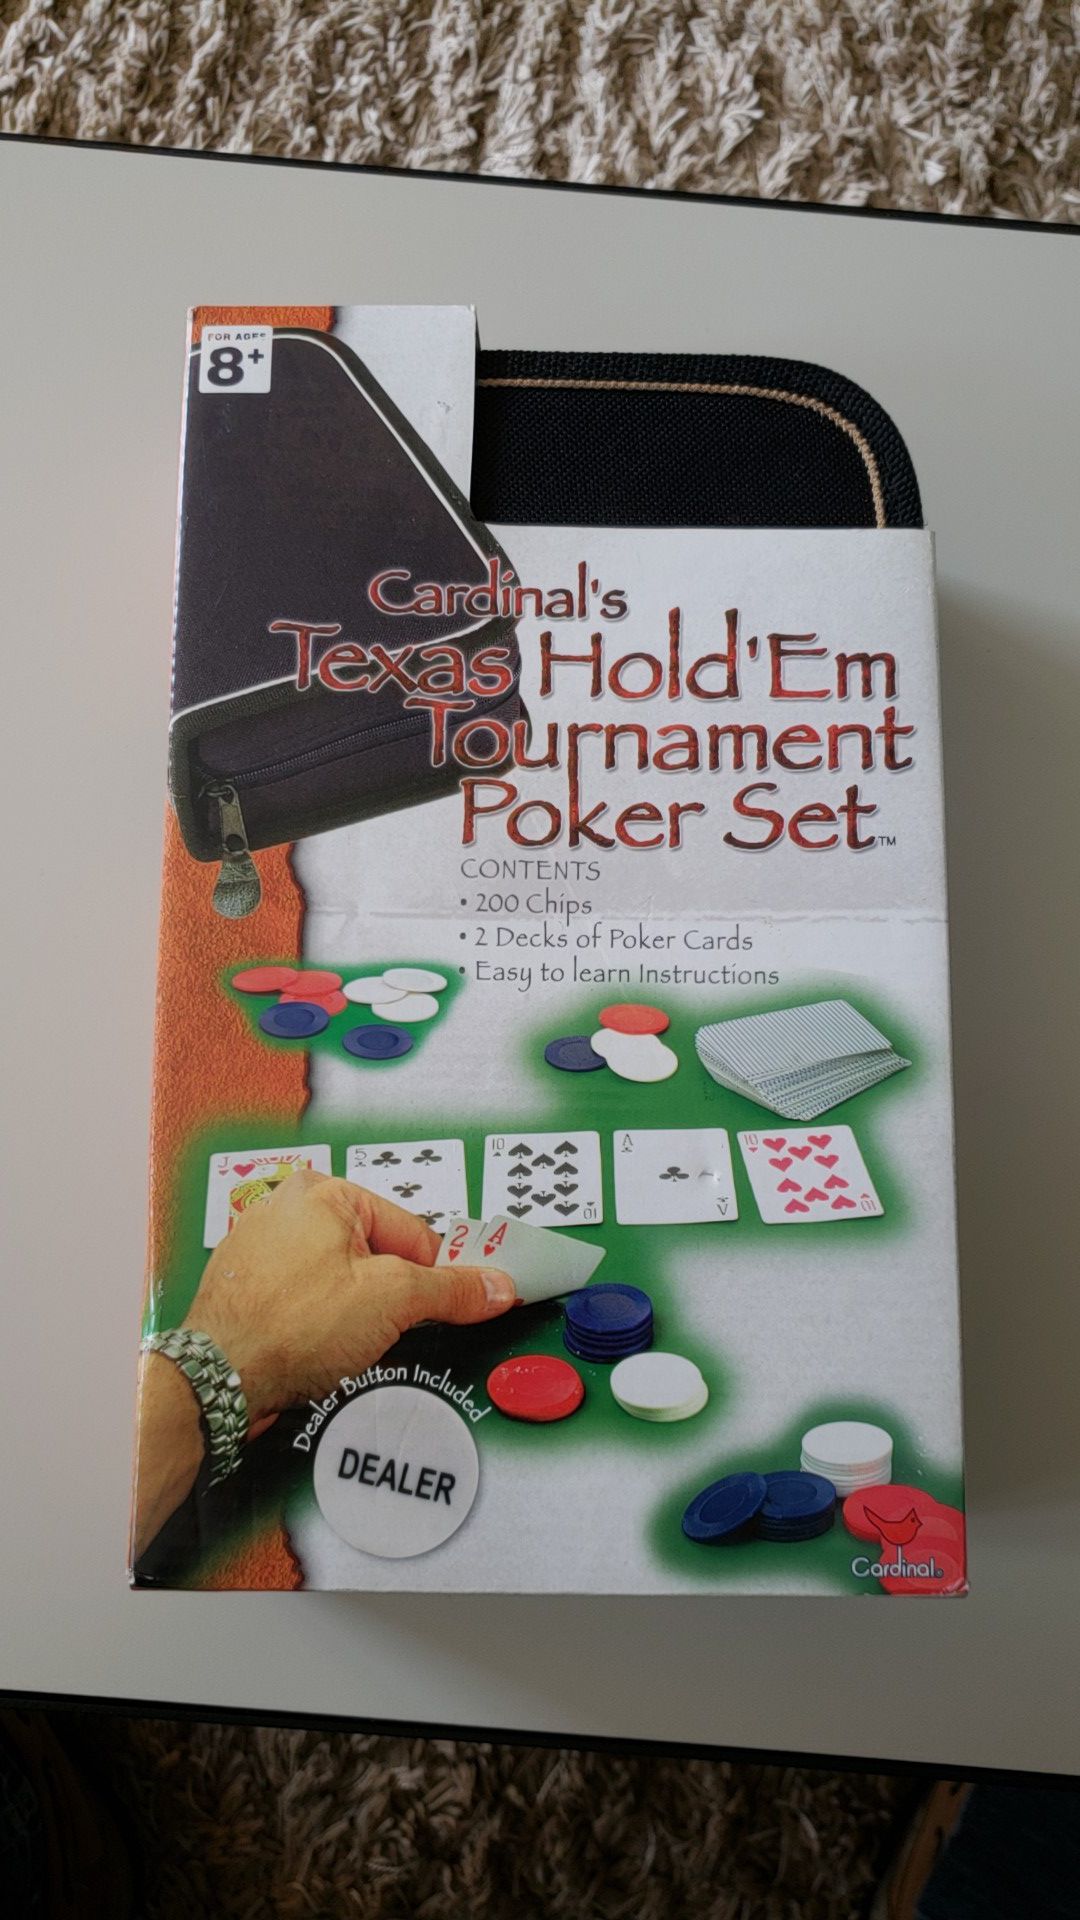 Poker set / cards and chips